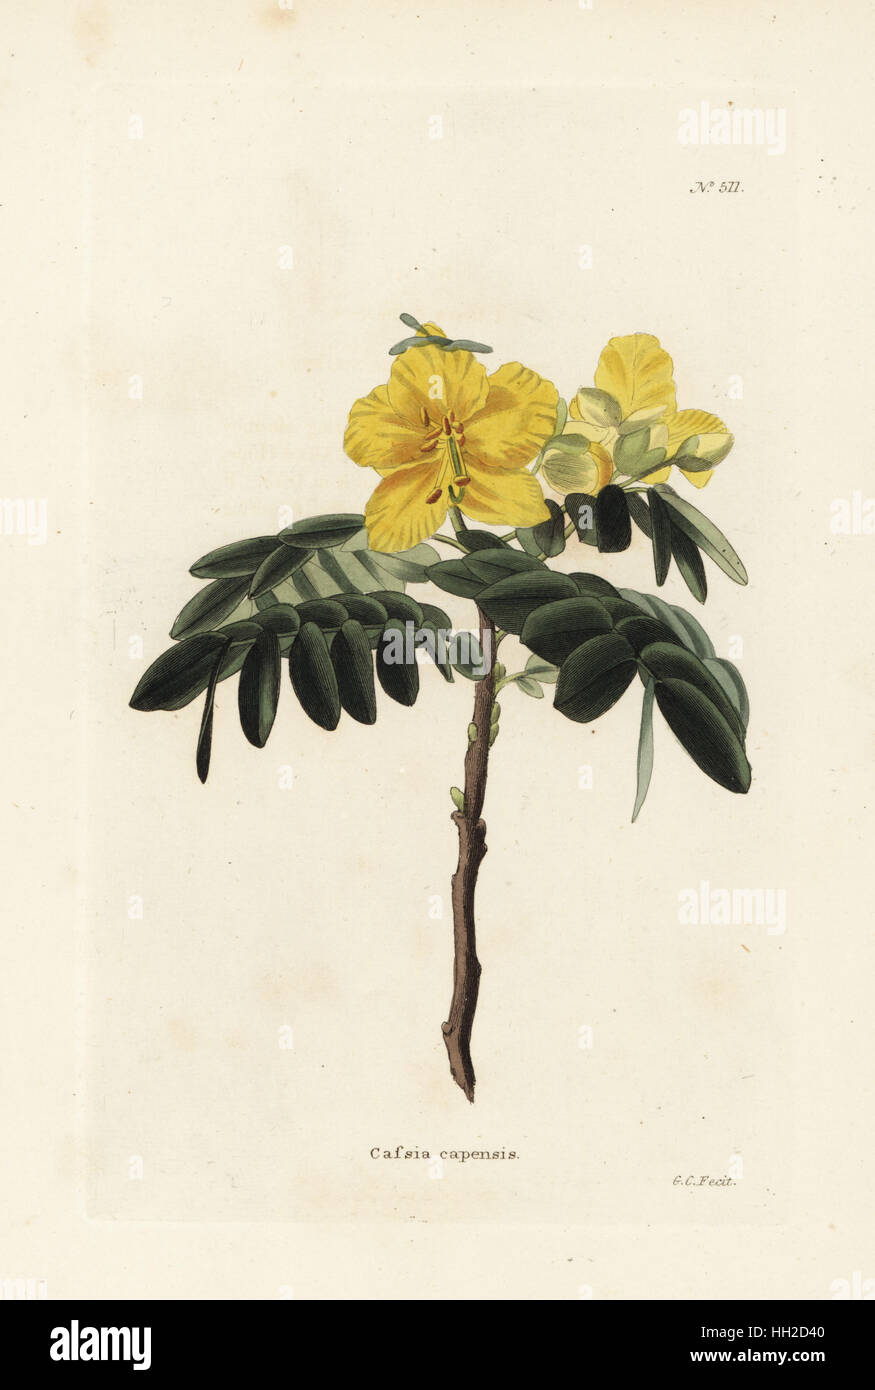 Chamaecrista capensis (Cassia capensis). Handcoloured copperplate engraving by George Cooke from Conrad Loddiges' Botanical Cabinet, Hackney, London, 1821. Stock Photo